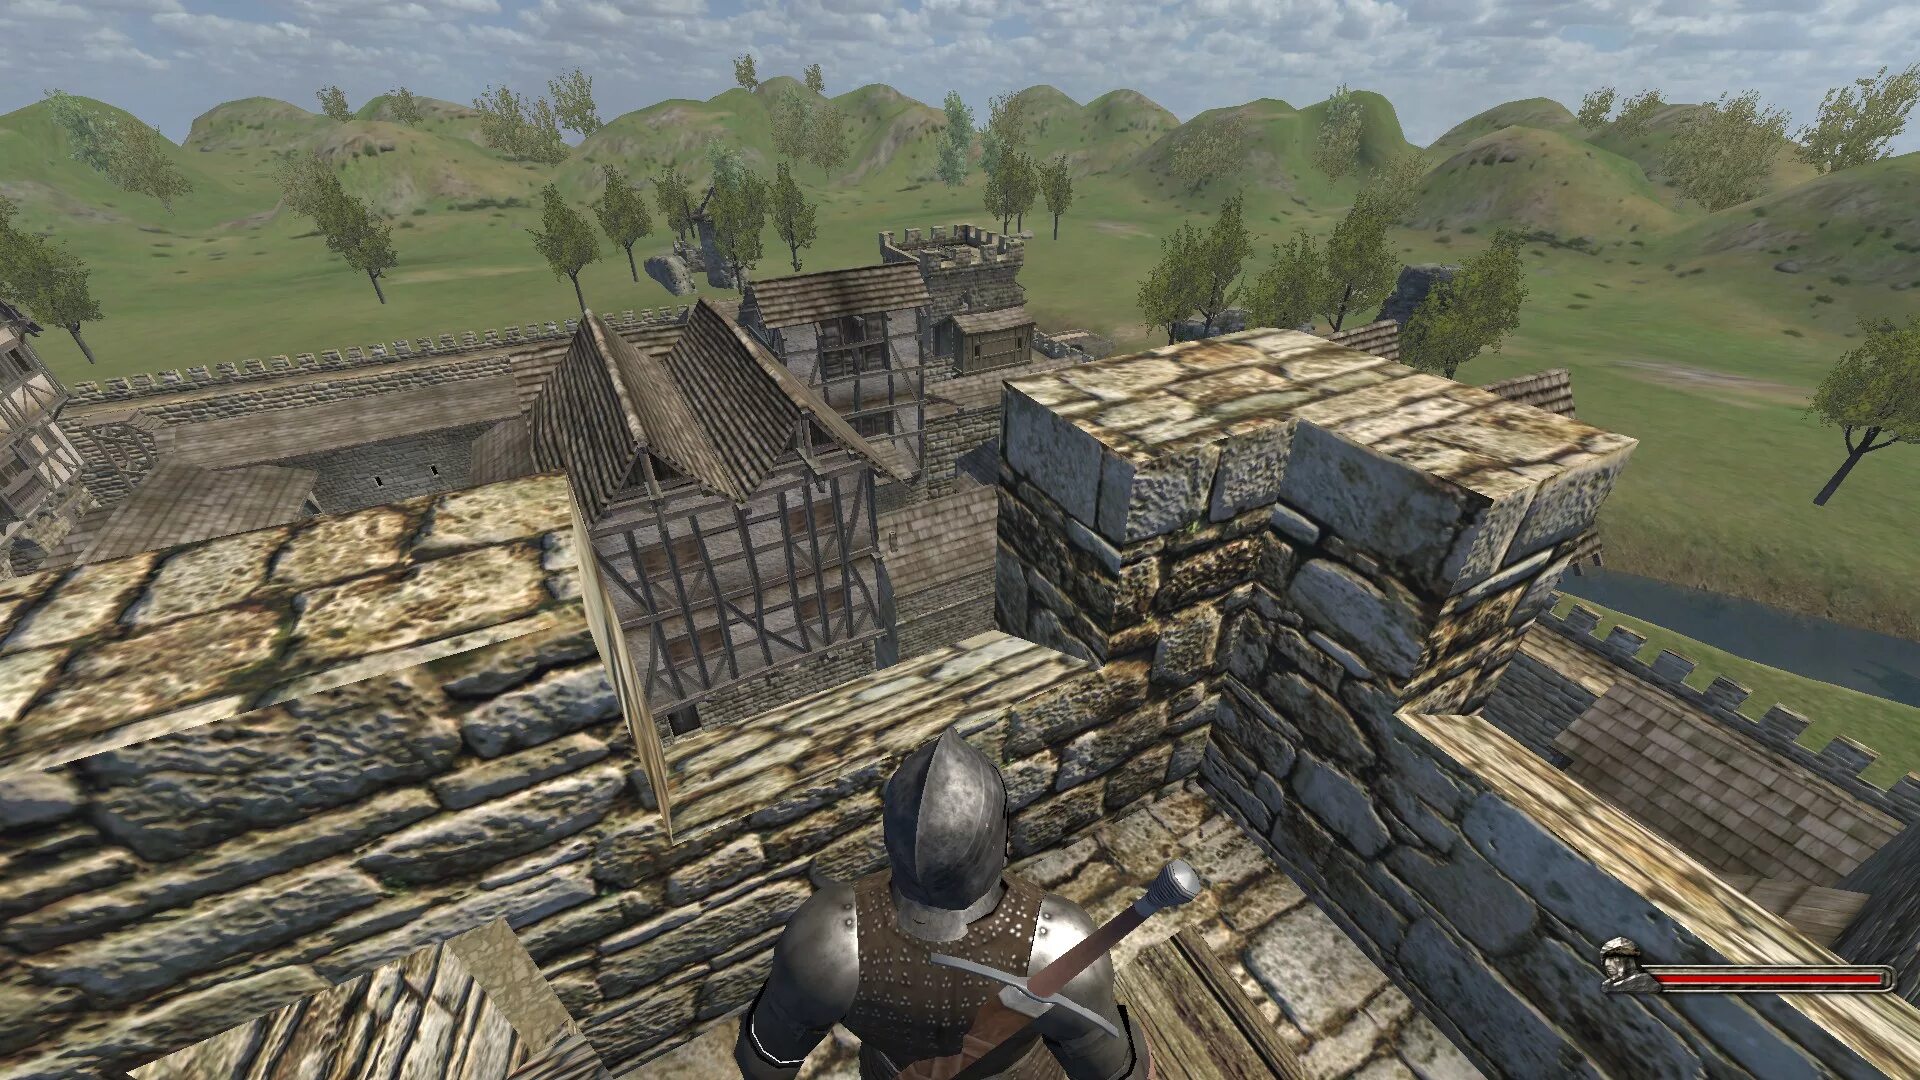 Mount and Blade город. Mount and Blade Warband City. Warband Rust. Warband Parabellum. Mount blade warband города